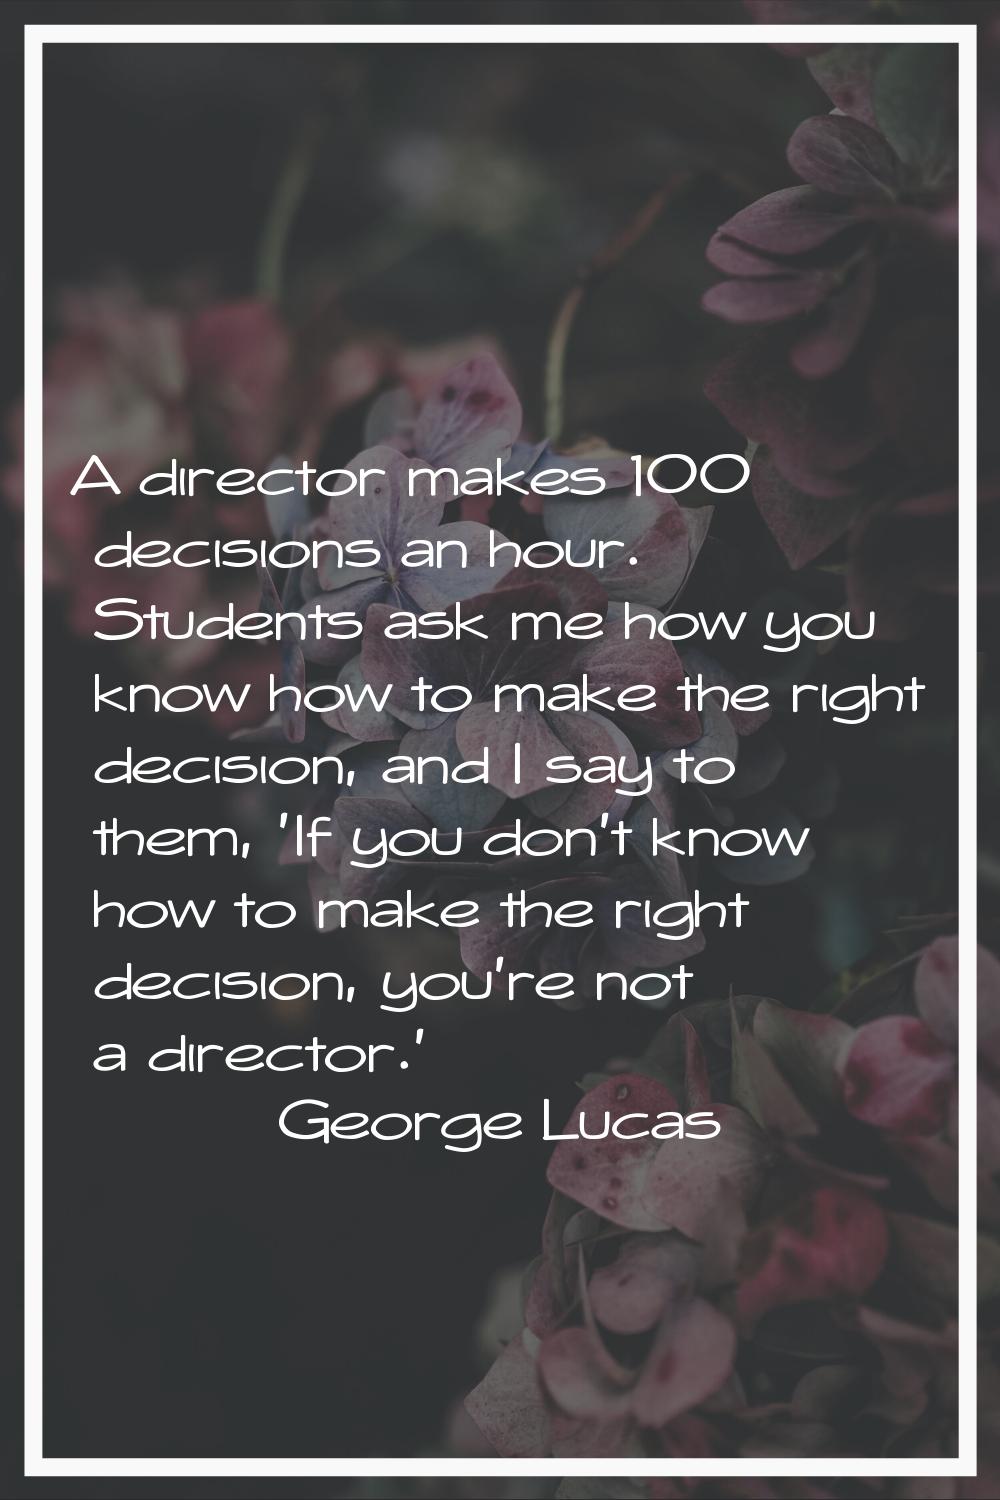 A director makes 100 decisions an hour. Students ask me how you know how to make the right decision